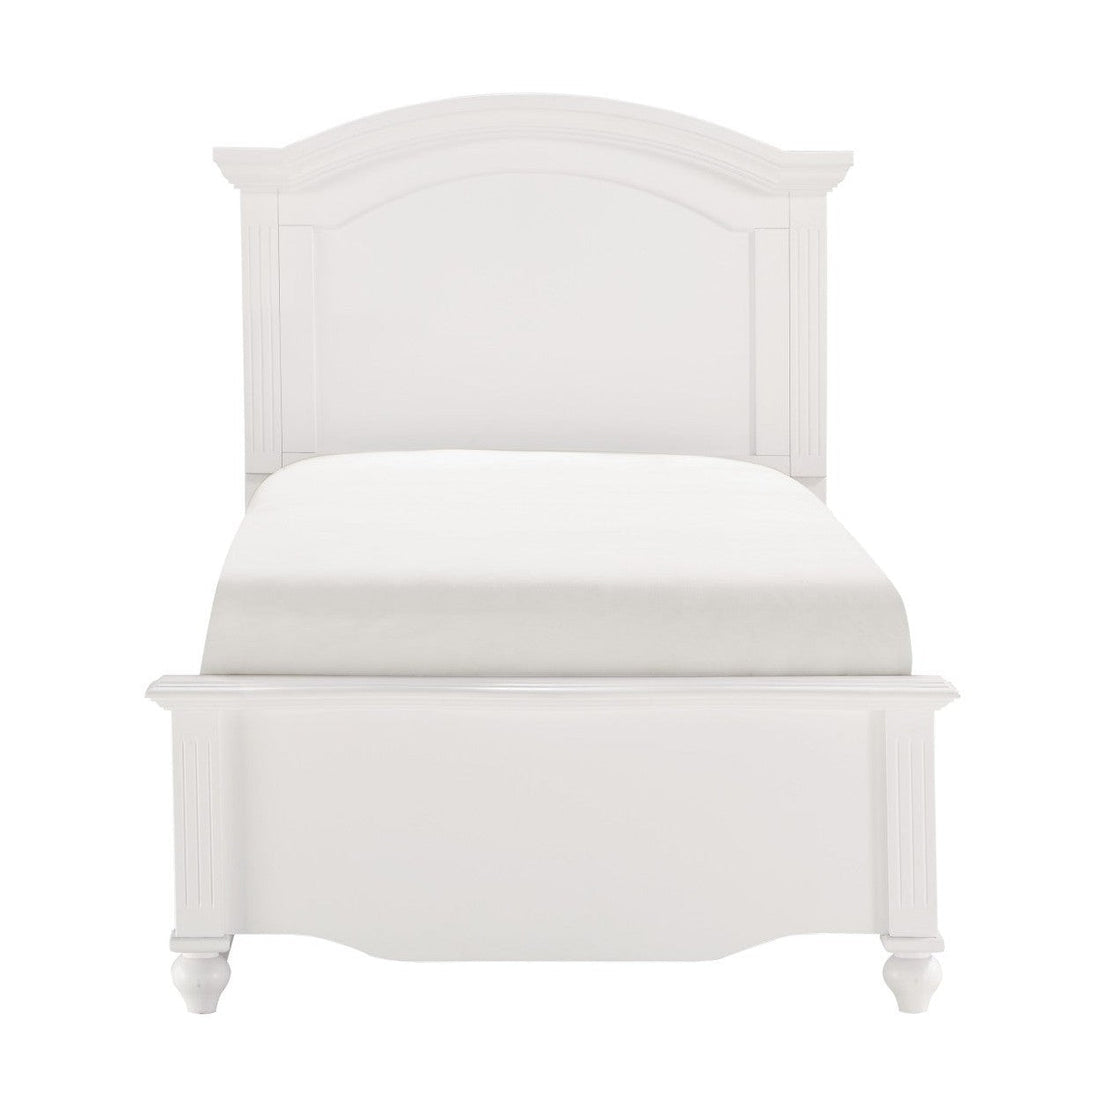 (3) Twin Bed, White 2058WHT-1*